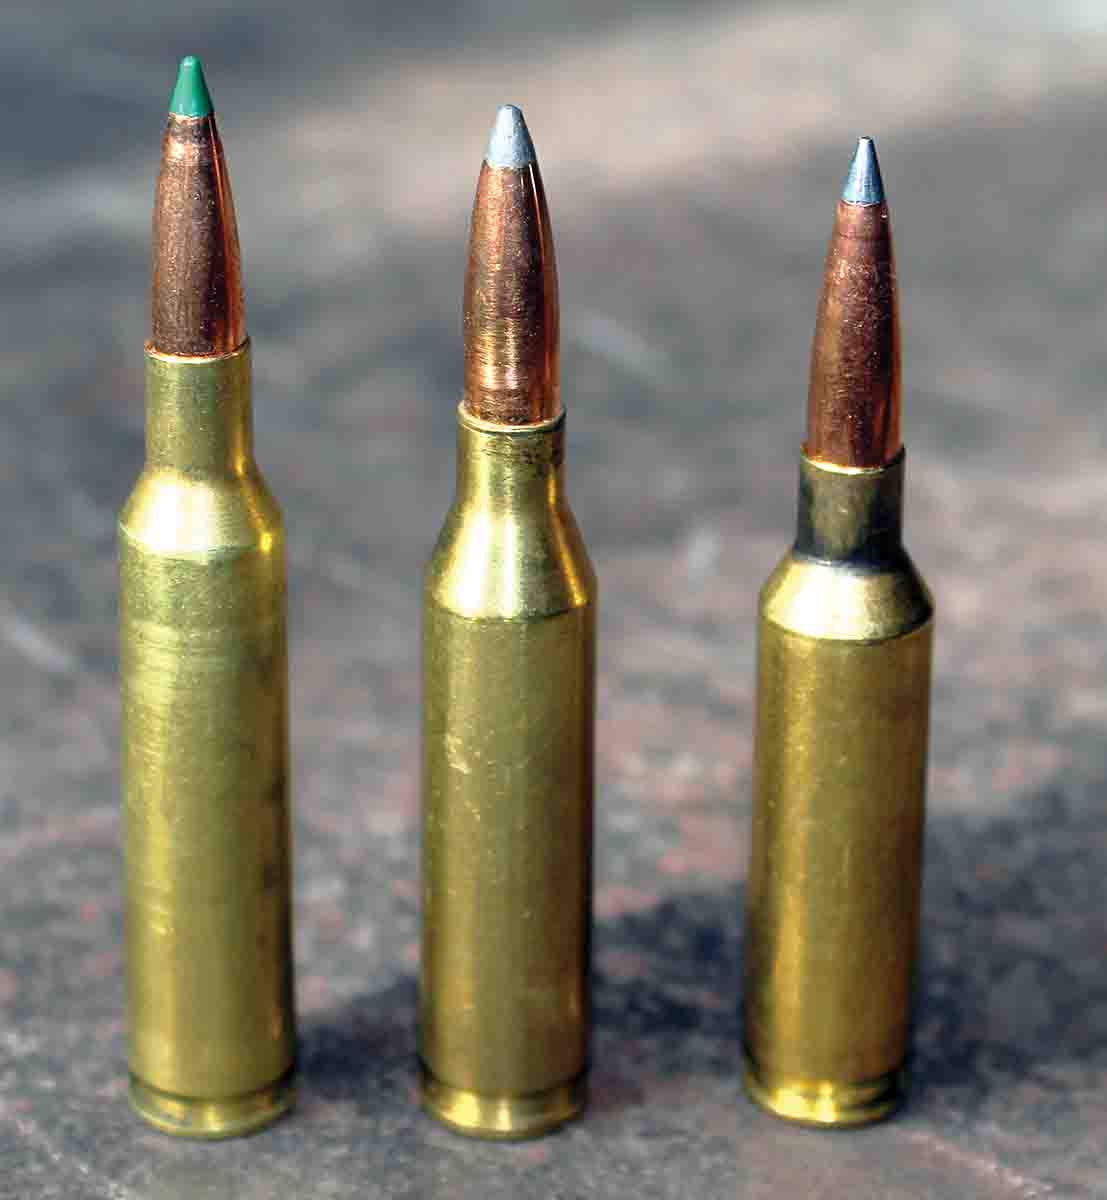 The 6mm Remington (left) is shown with the .243 Winchester (center) and the 6mm Creedmoor (right). The superior 6mm Remington lost the popularity contest to the .243 Winchester, with the 6mm Creedmoor positioned to overtake the .243.